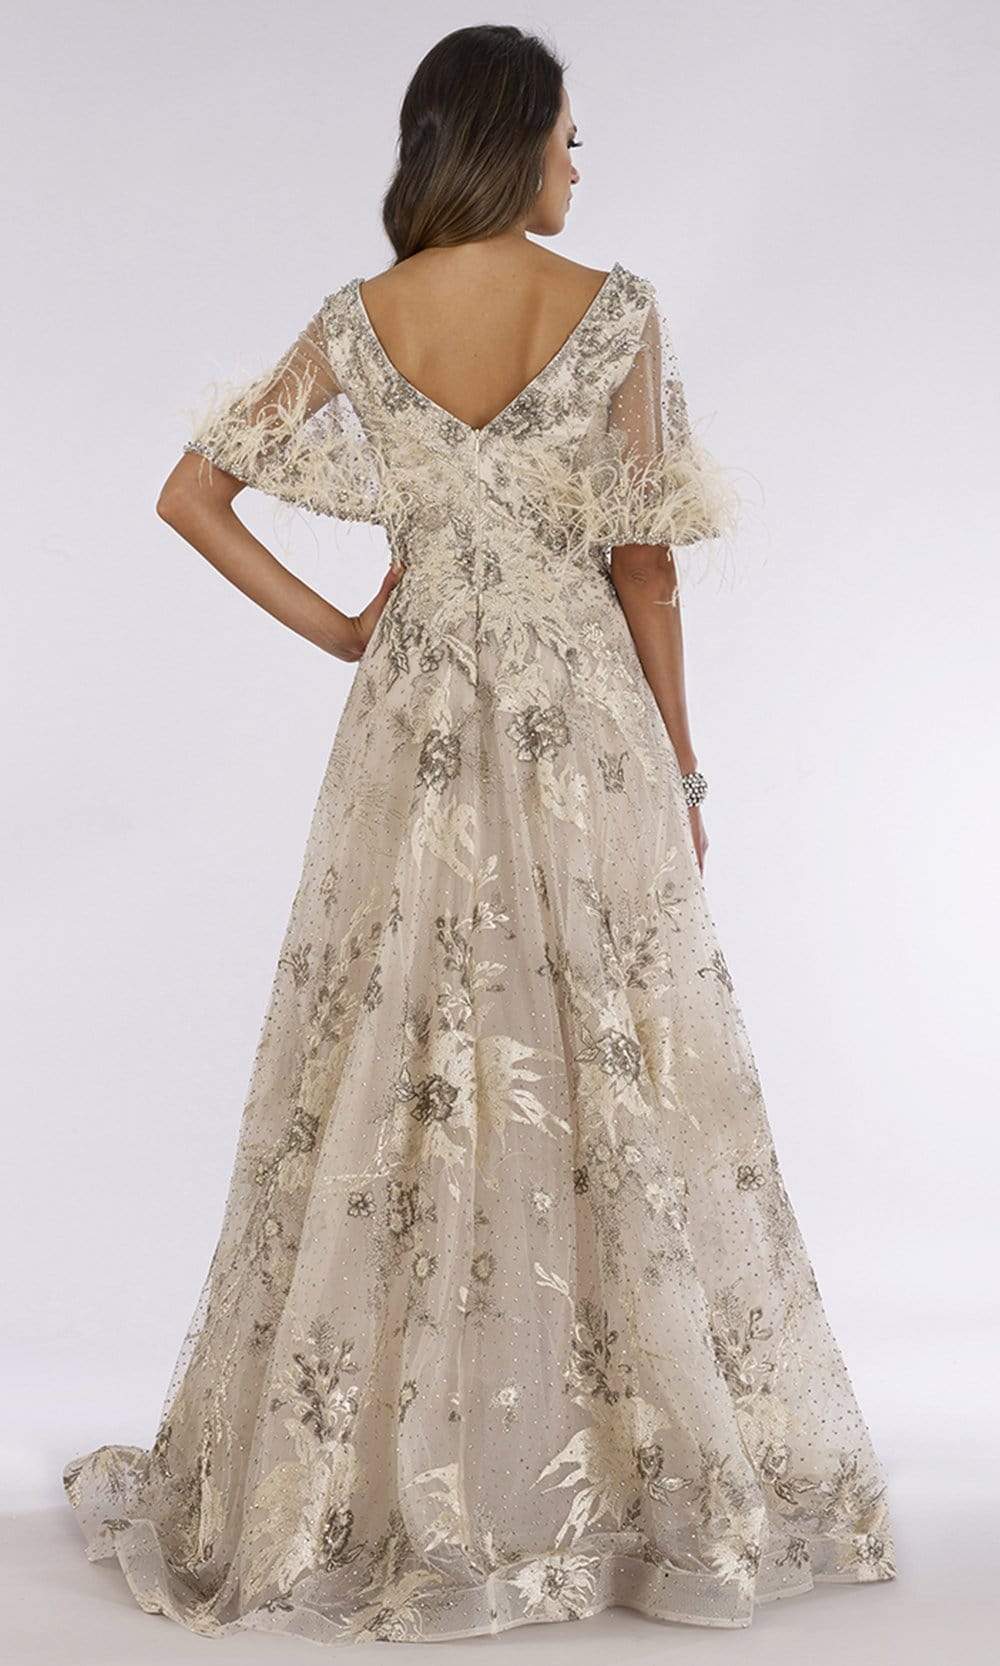 Lara Dresses - 29622 Feathery Sheer Cape Sleeve Embellish A-Line Gown Mother of the Bride Dresses